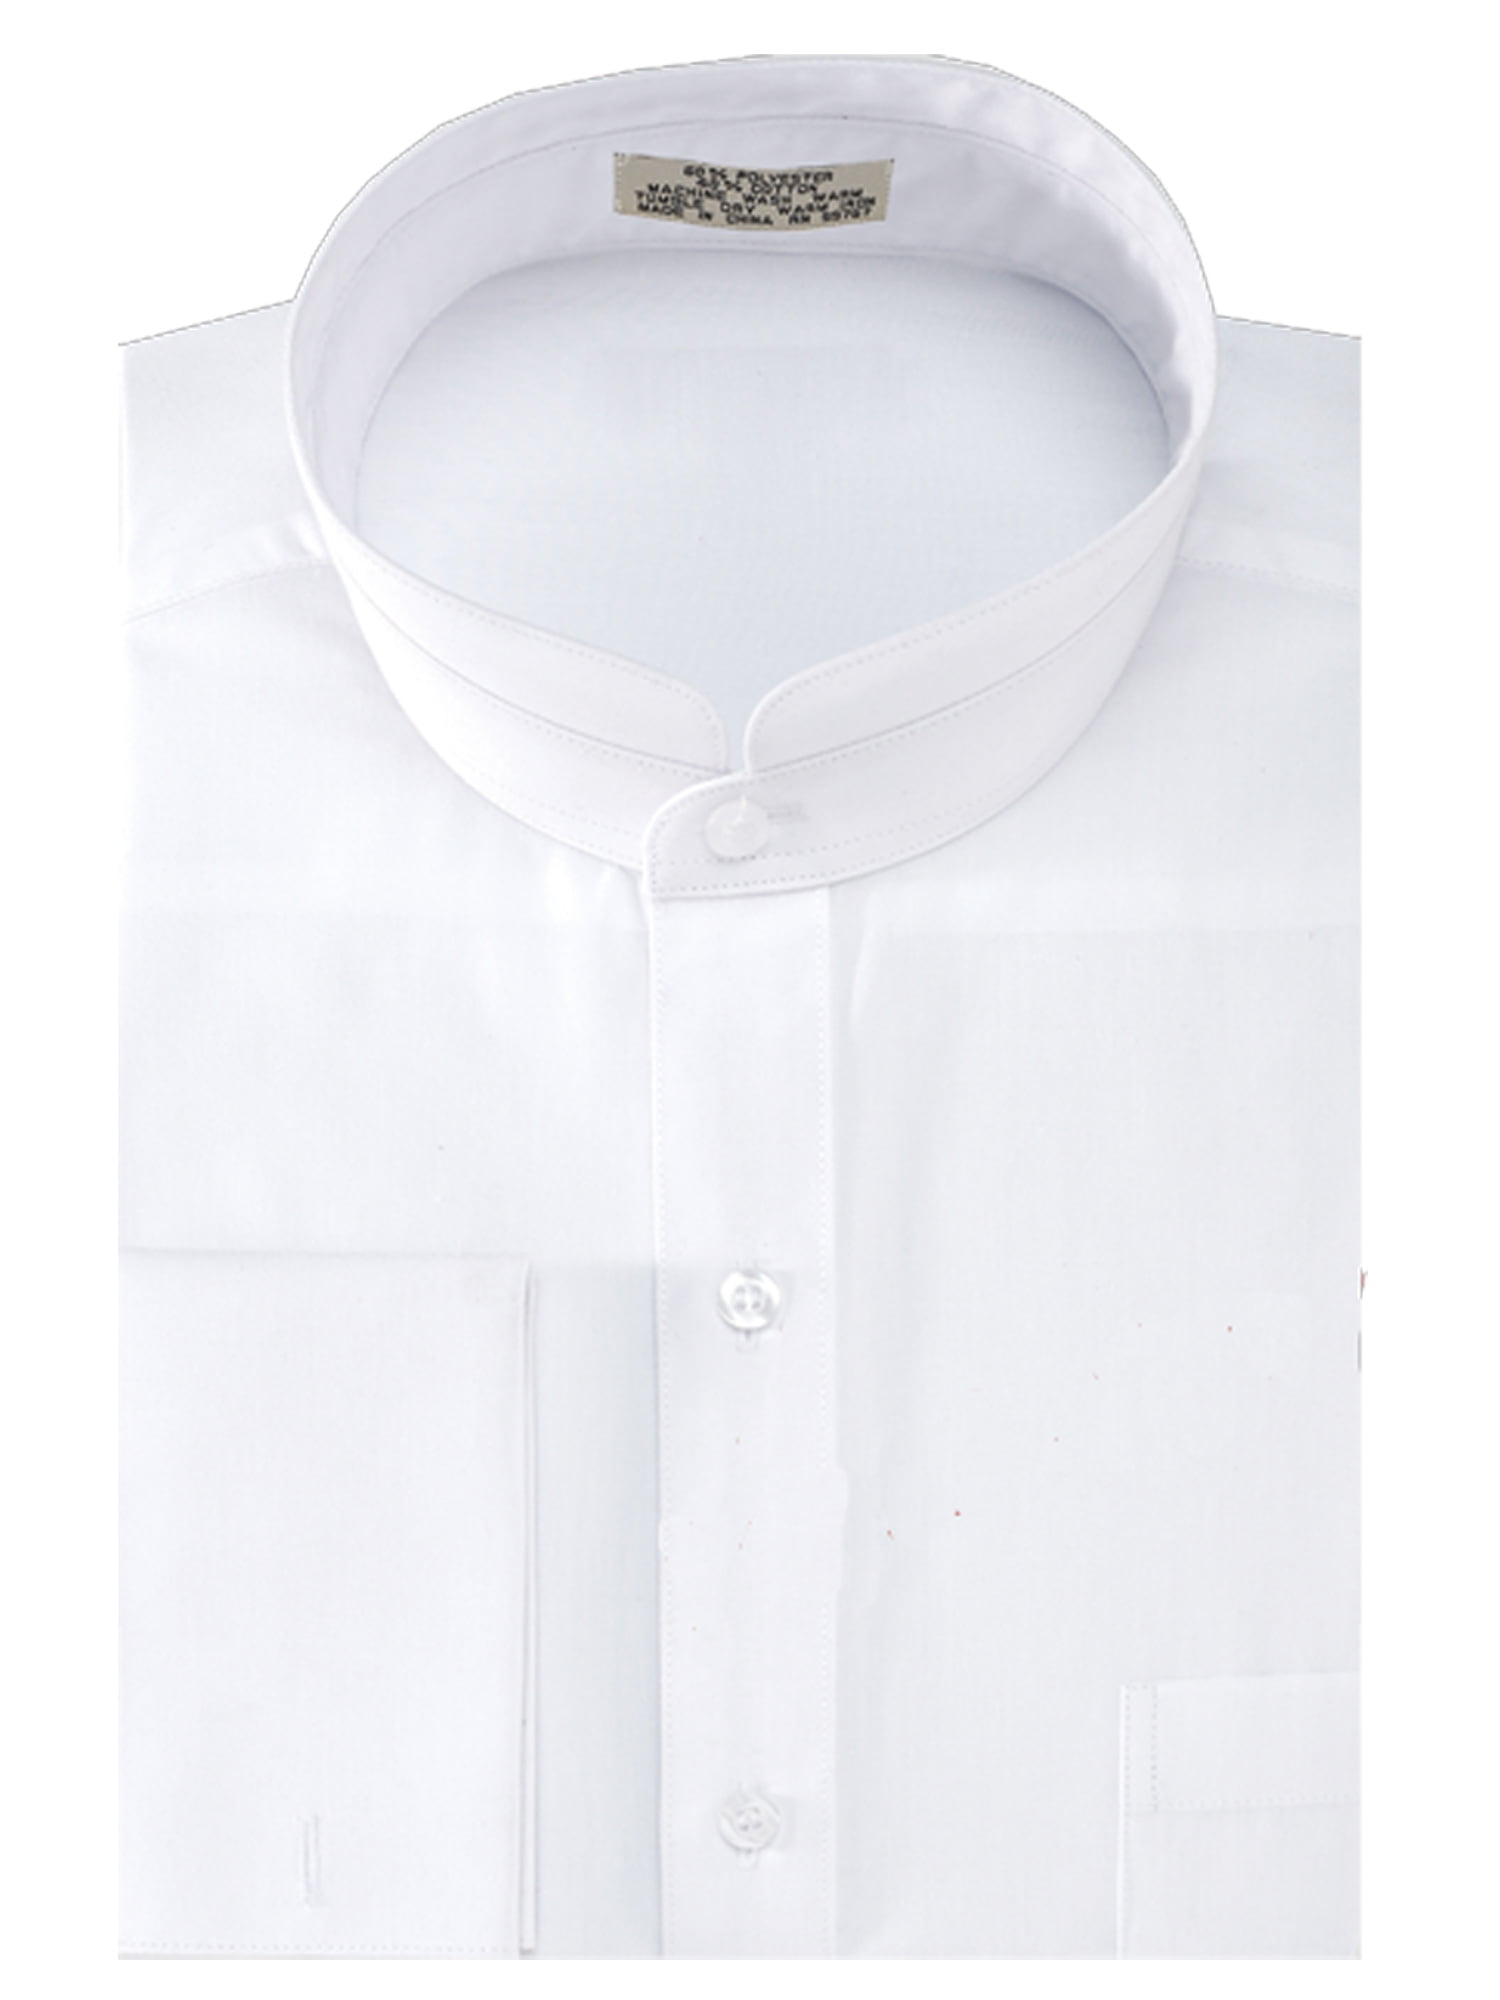 Men's Solid Banded Collar French Cuff Dress Shirt Solid Color - Walmart.com